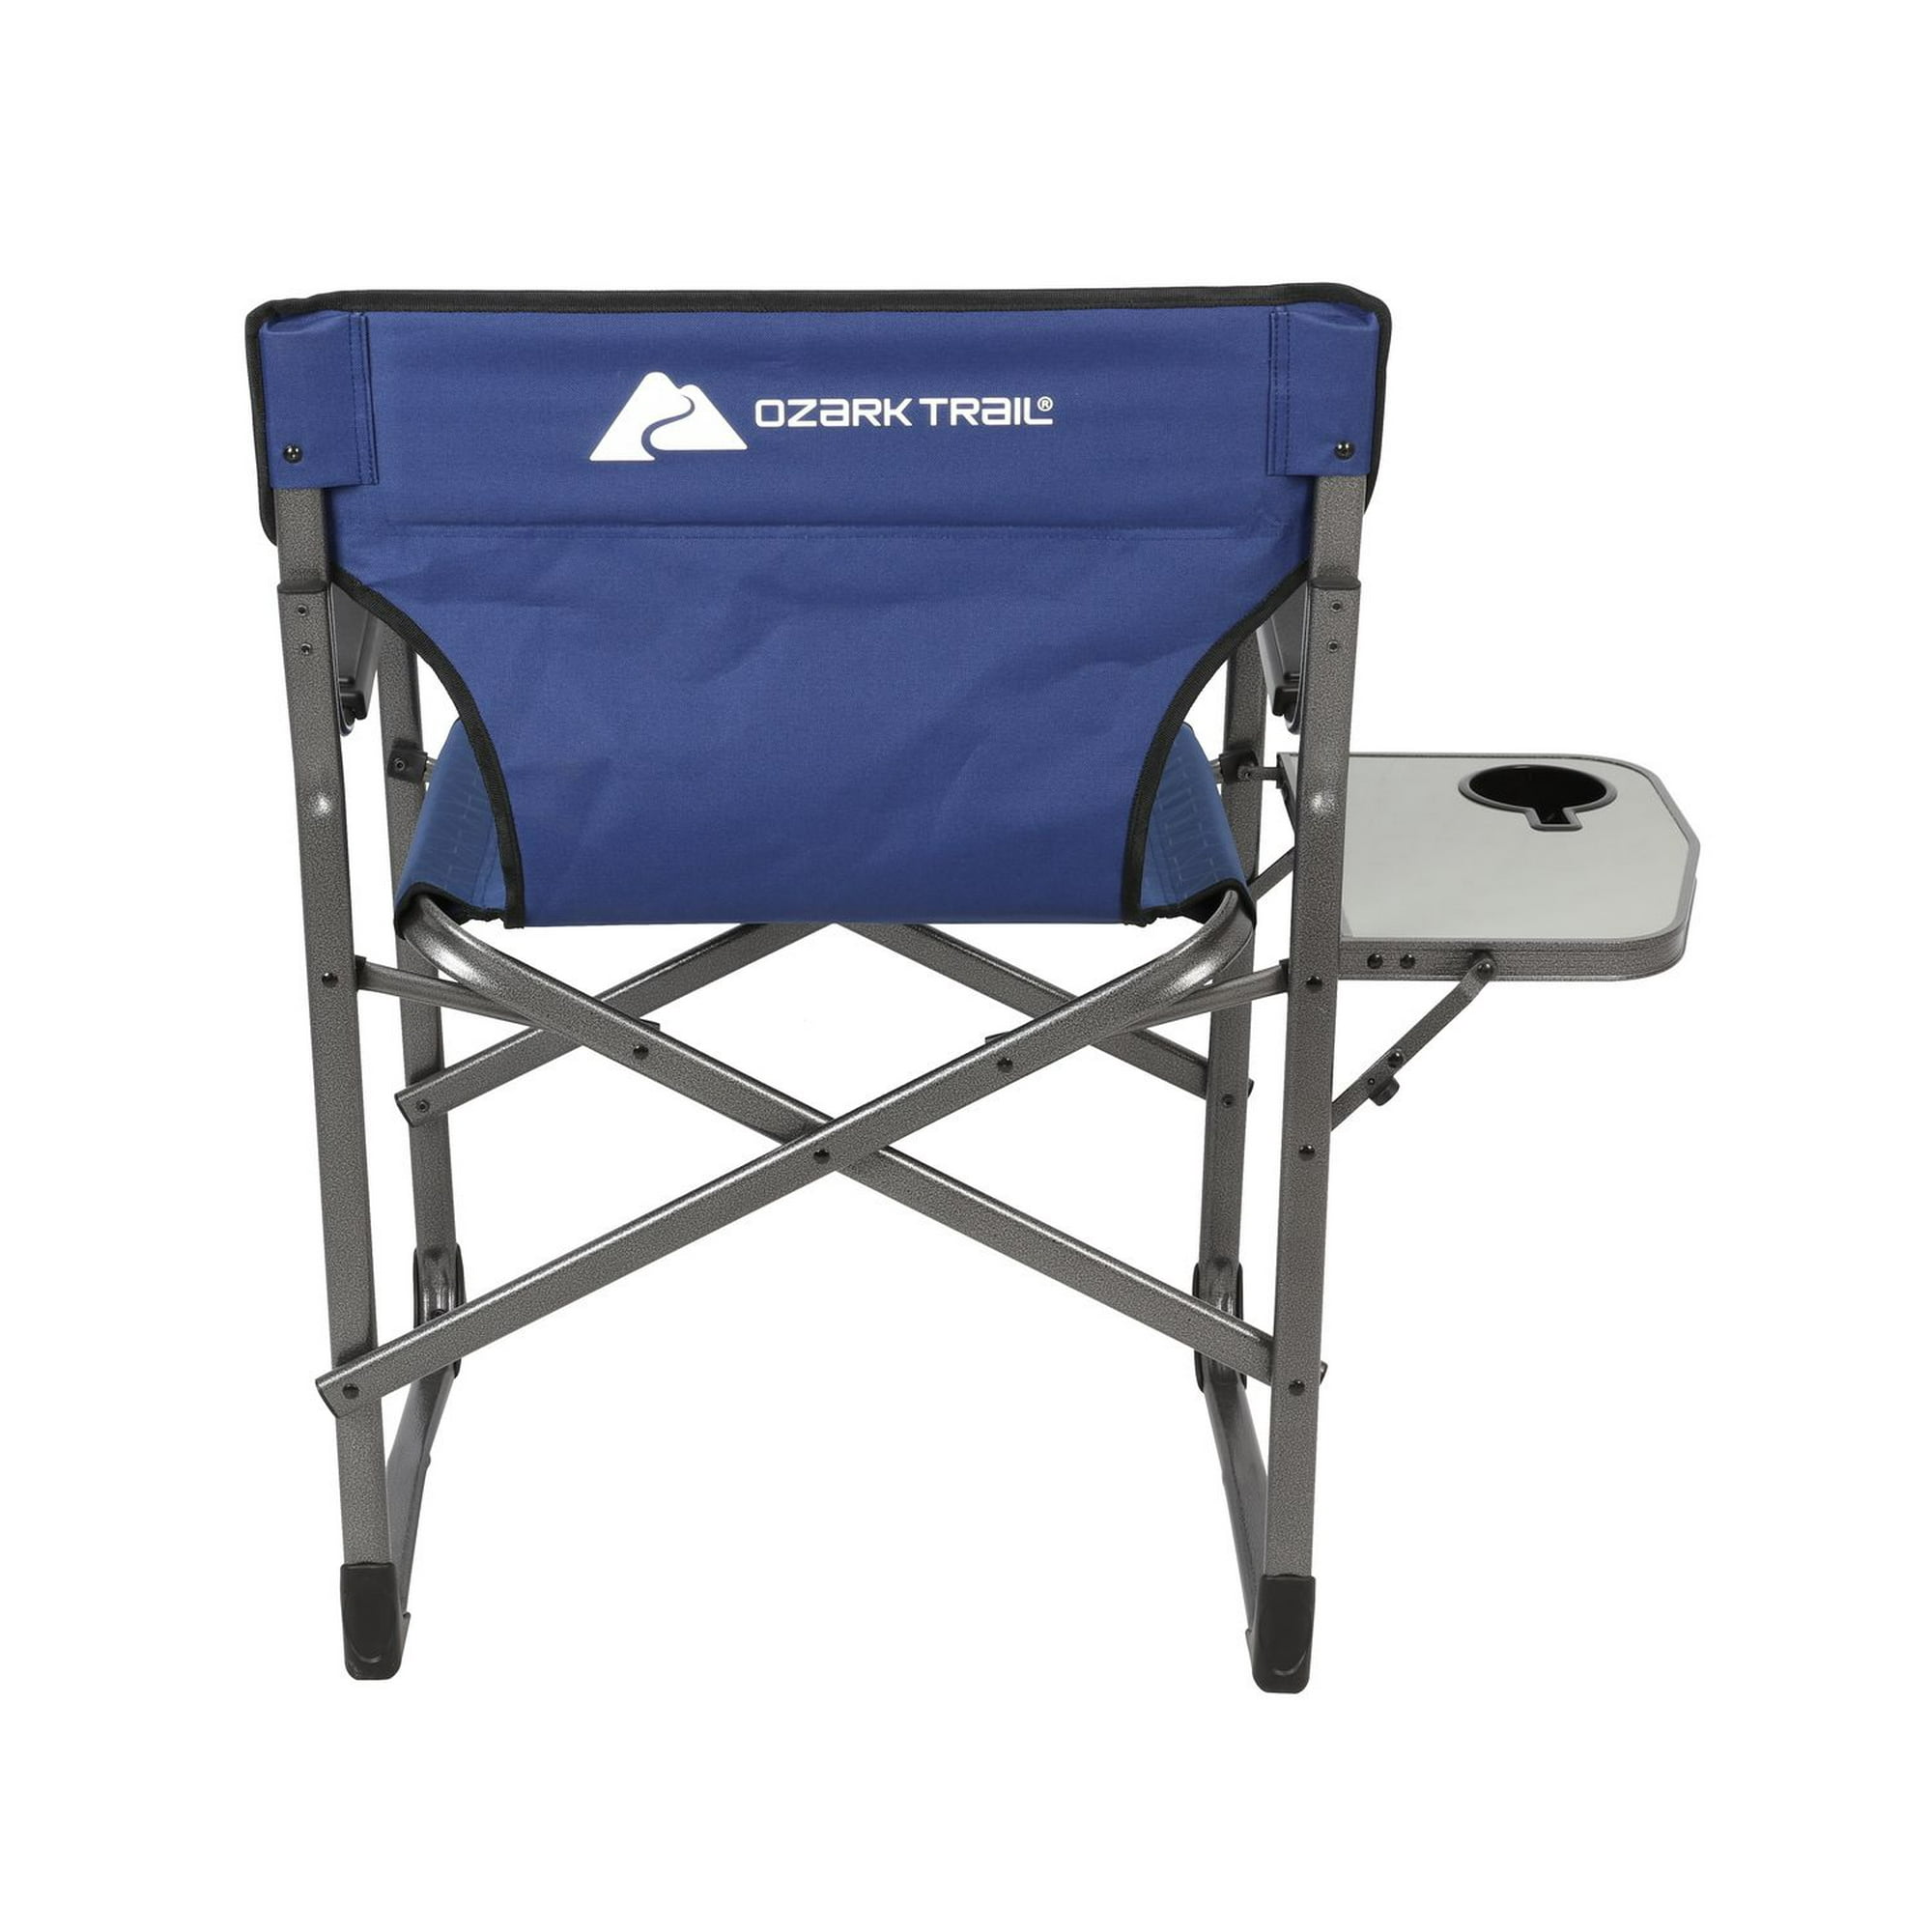 Ozark Trail Blue and Grey Comfort Mesh Camping Chair, Outdoor & Garden